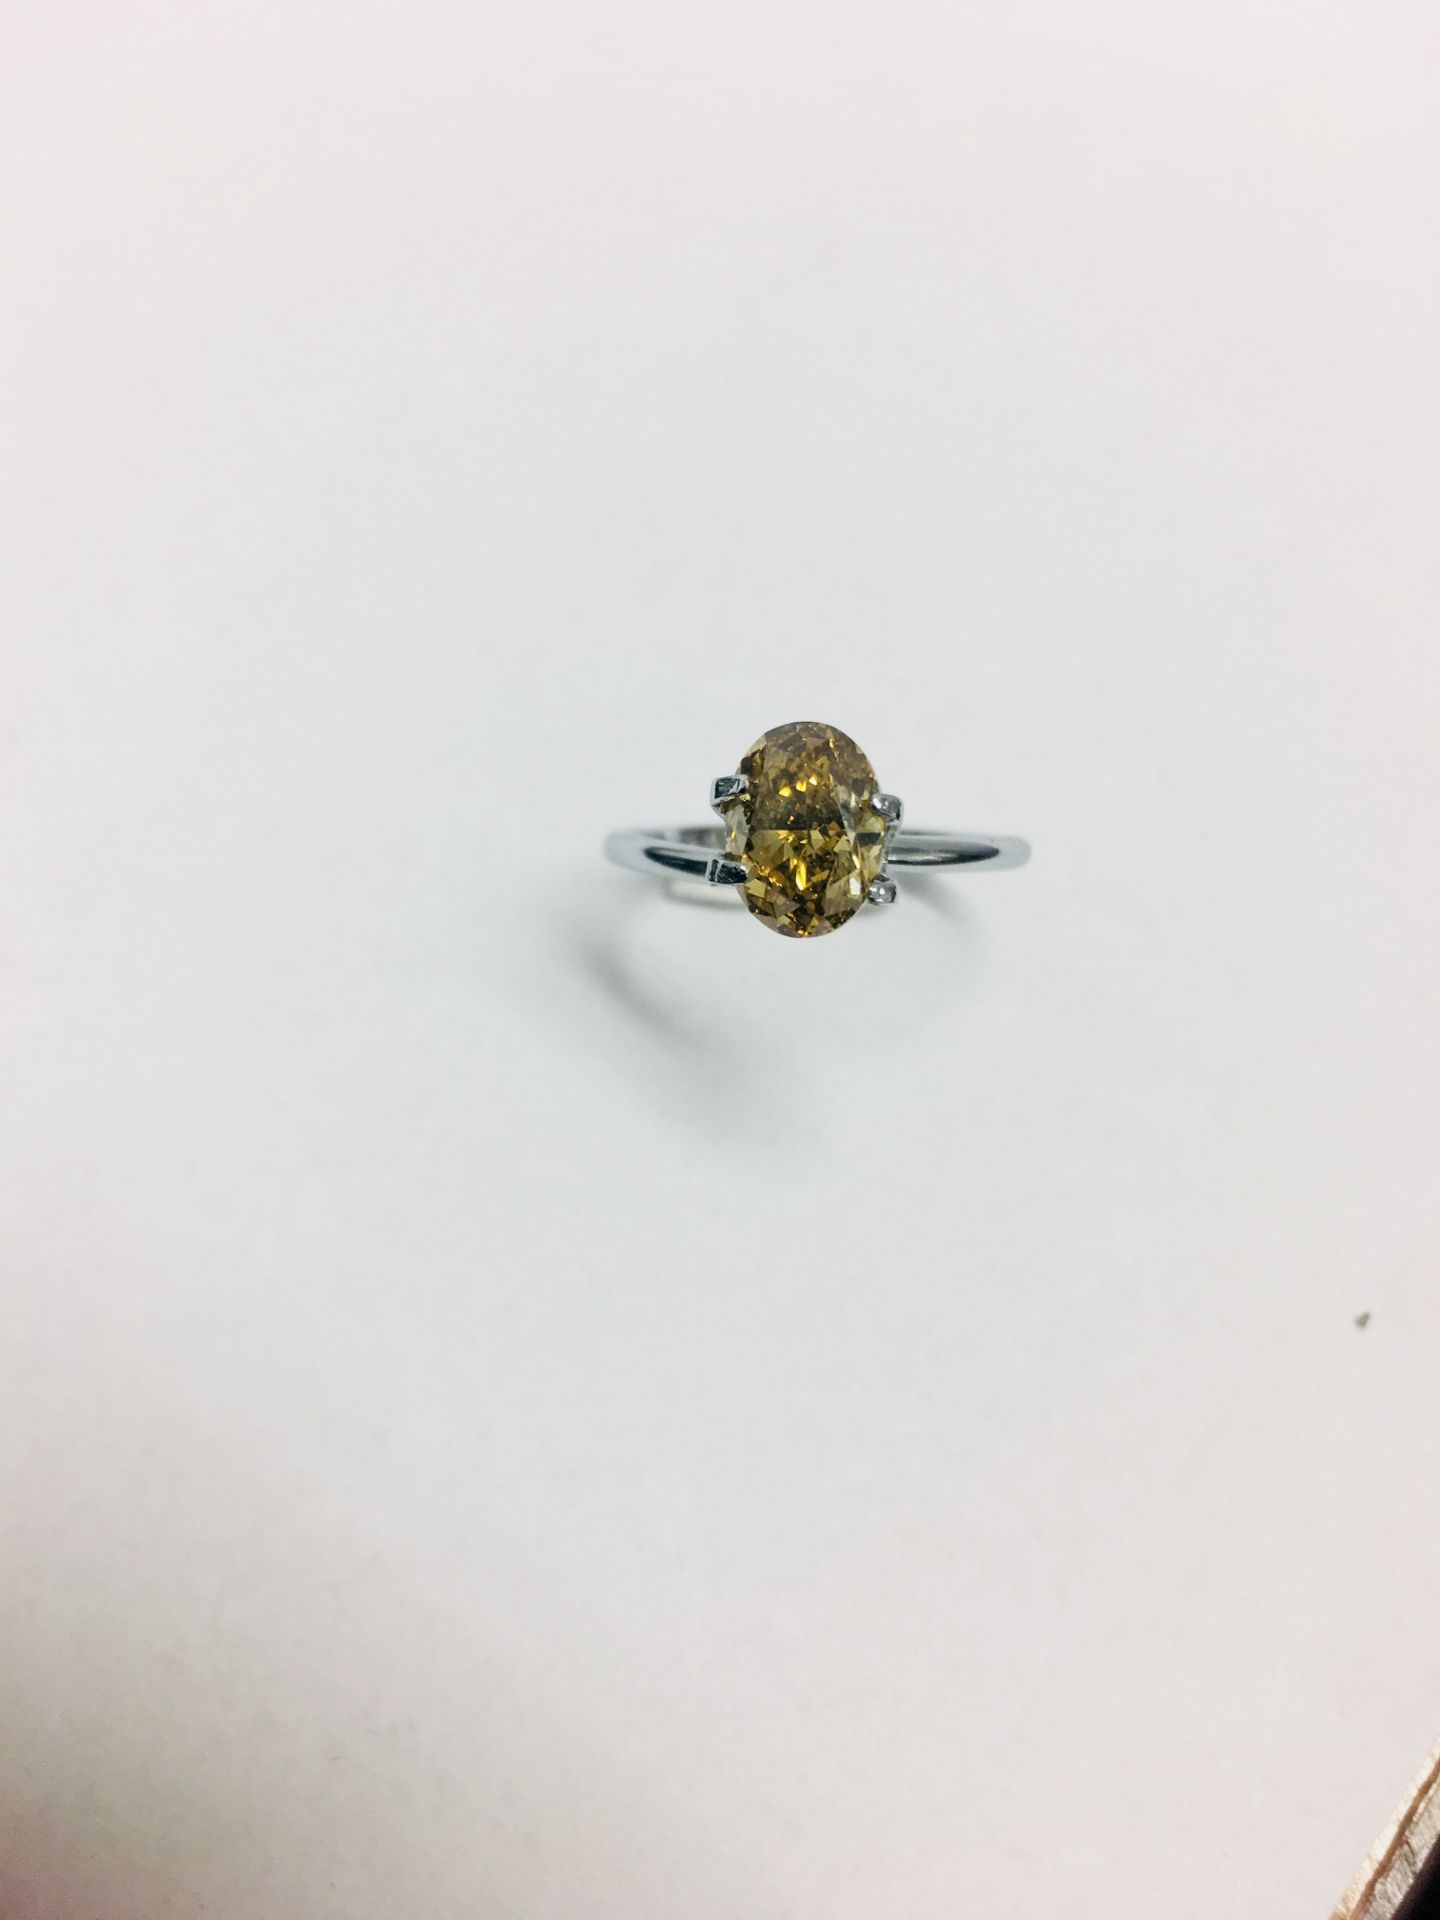 1.67ct Fancy oval diamond,vs2 clarity,fancydeep brown -yellow.hpht treated ,GIA certification - Image 2 of 3